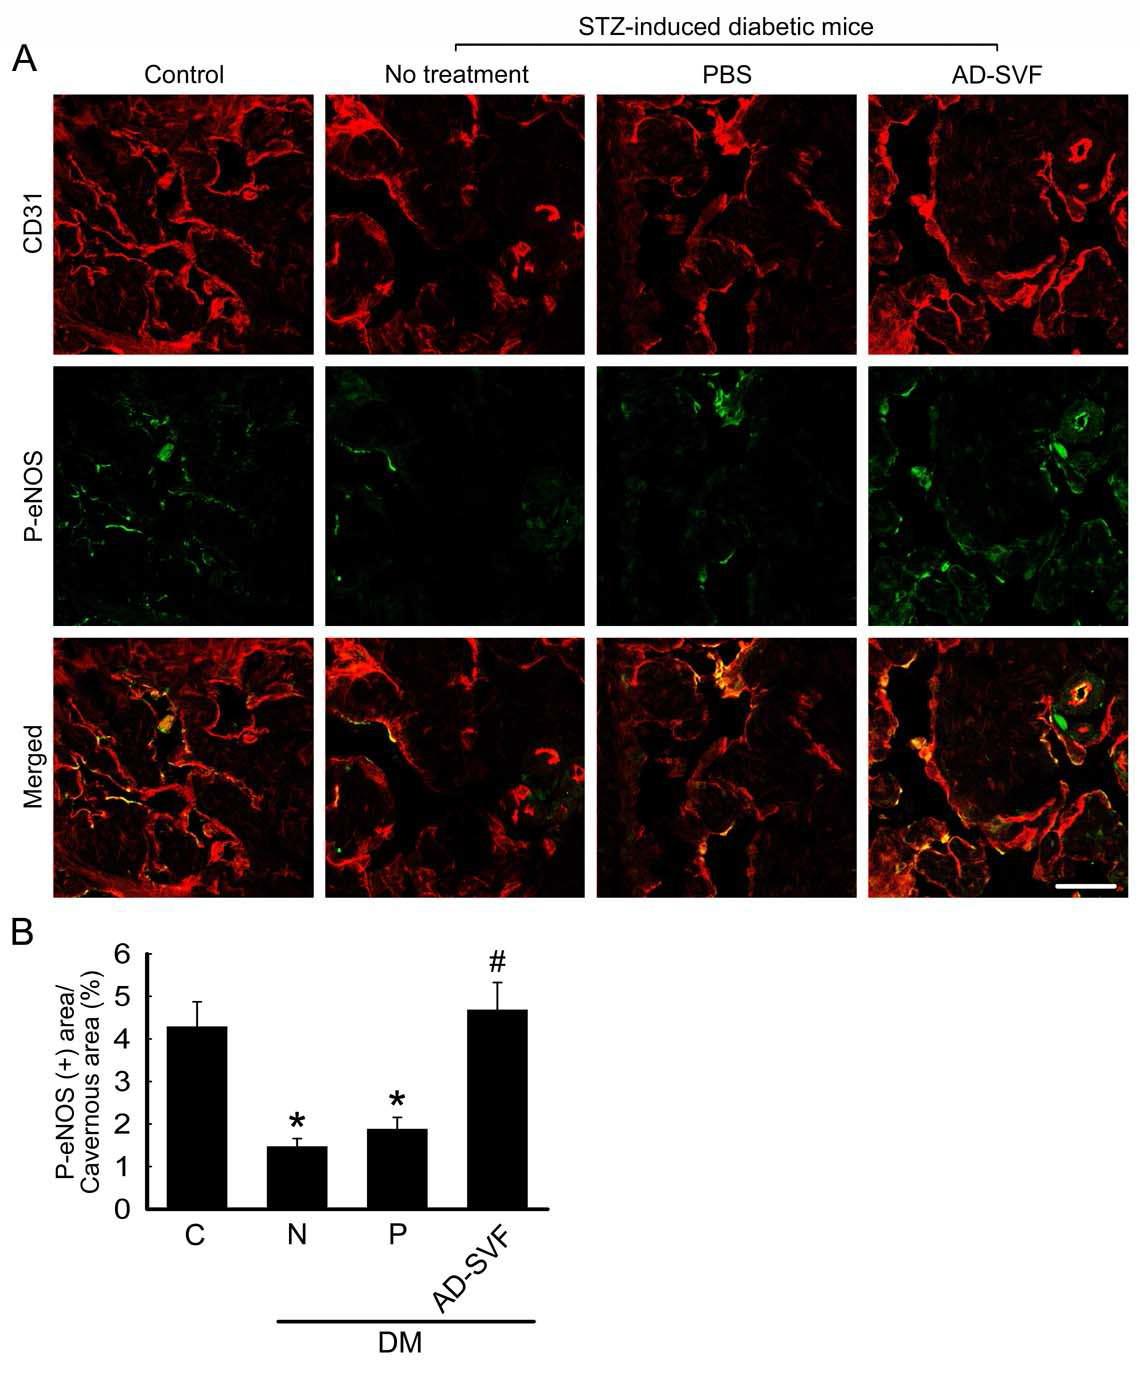 AD-SVF transfer induces cavernous eNOS phosphorylation and increases cGMP concentration. (A) Anti-CD31 (red) and phospho-eNOS staining (Ser1177; green) of cavernous tissue from age-matched control, untreated diabetic mice, or diabetic mice 2 wk after receiving intracavernous injection of PBS (20 μl) or AD-SVF (1 × 105 cells/20 μl). Scale bar=200μm. (B) Each bar depicts the mean values (± SE) from n=6 animals per group. *p < 0.01 vs control and AD-SVF-treated diabetic groups, #p < 0.01 vs untreated and PBS-treated diabetic groups. STZ = streptozotocin; AD-SVF = adipose tissue-derived stromal vascular fraction; C = control; N = no treatment; P = phosphate-buffered saline; DM = diabetes mellitus.